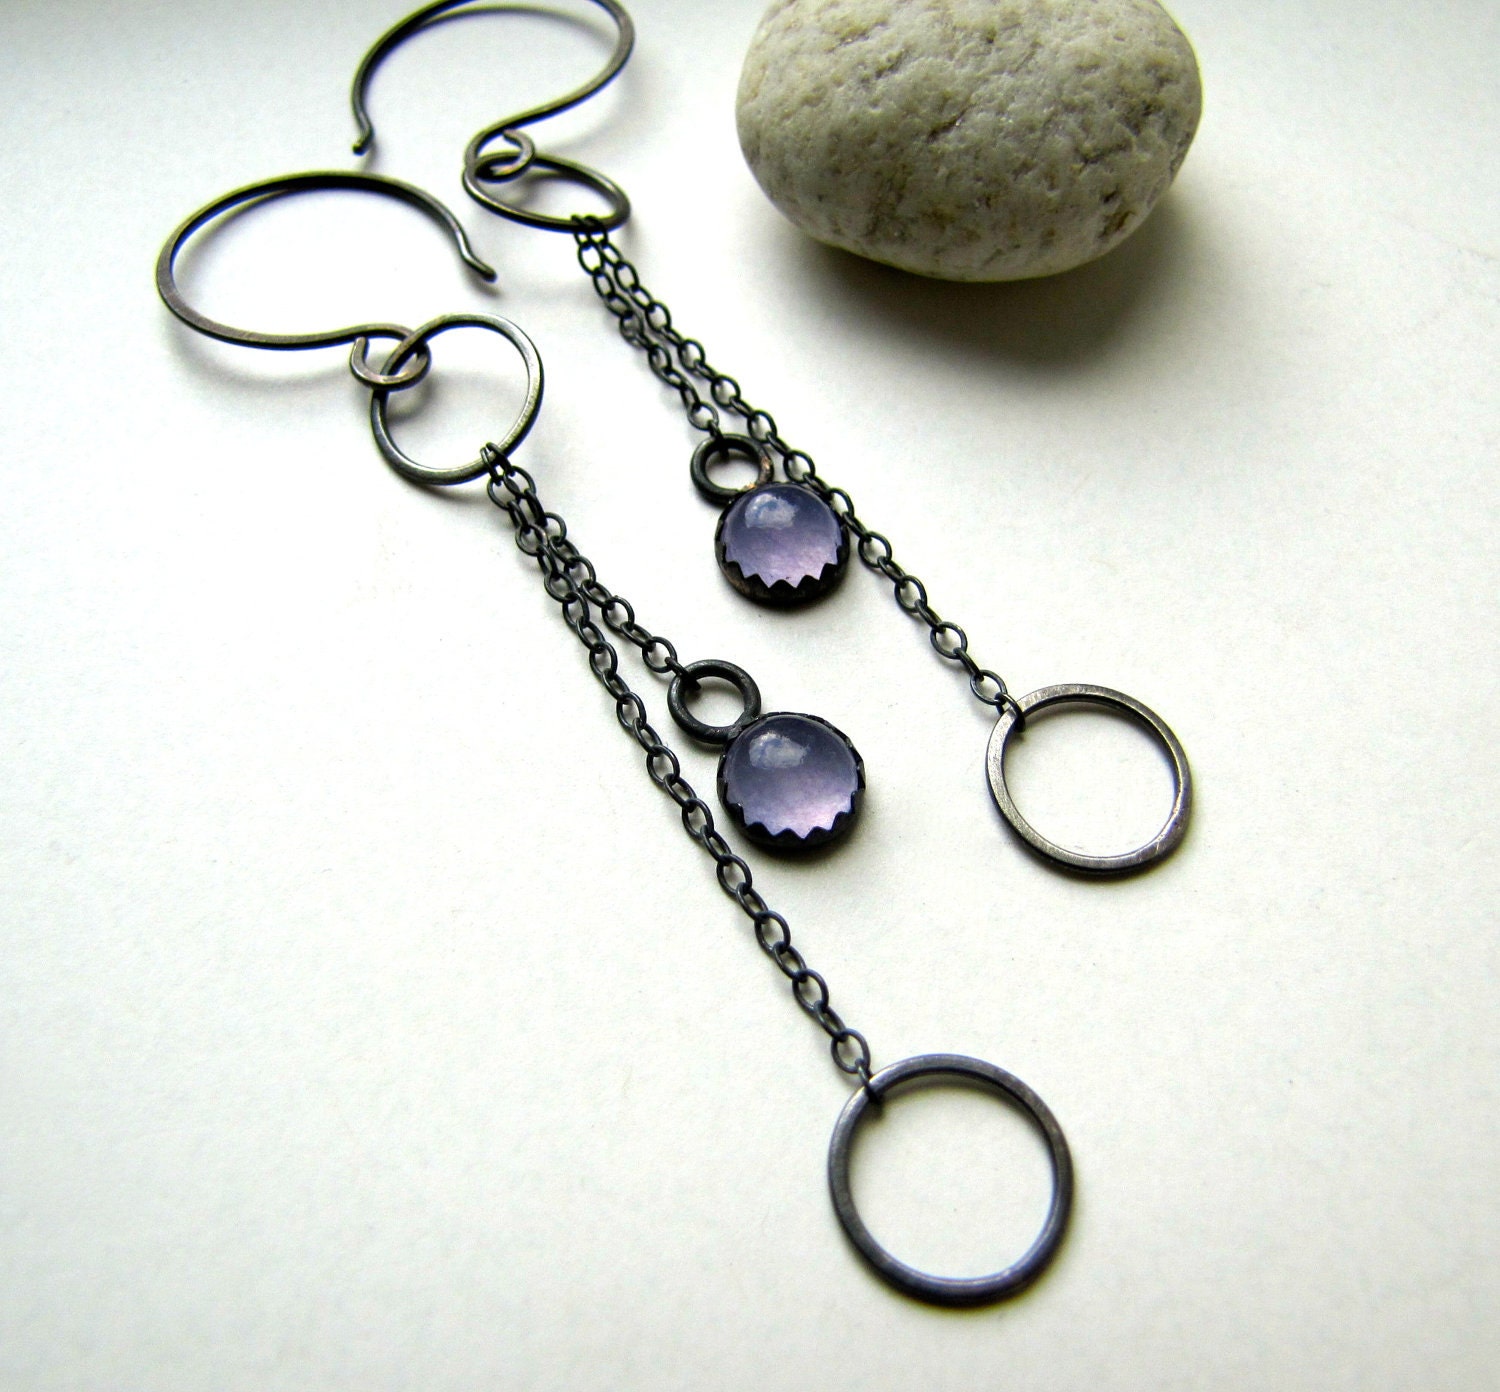 Balancing Act purple chalcedony and sterling silver earrings